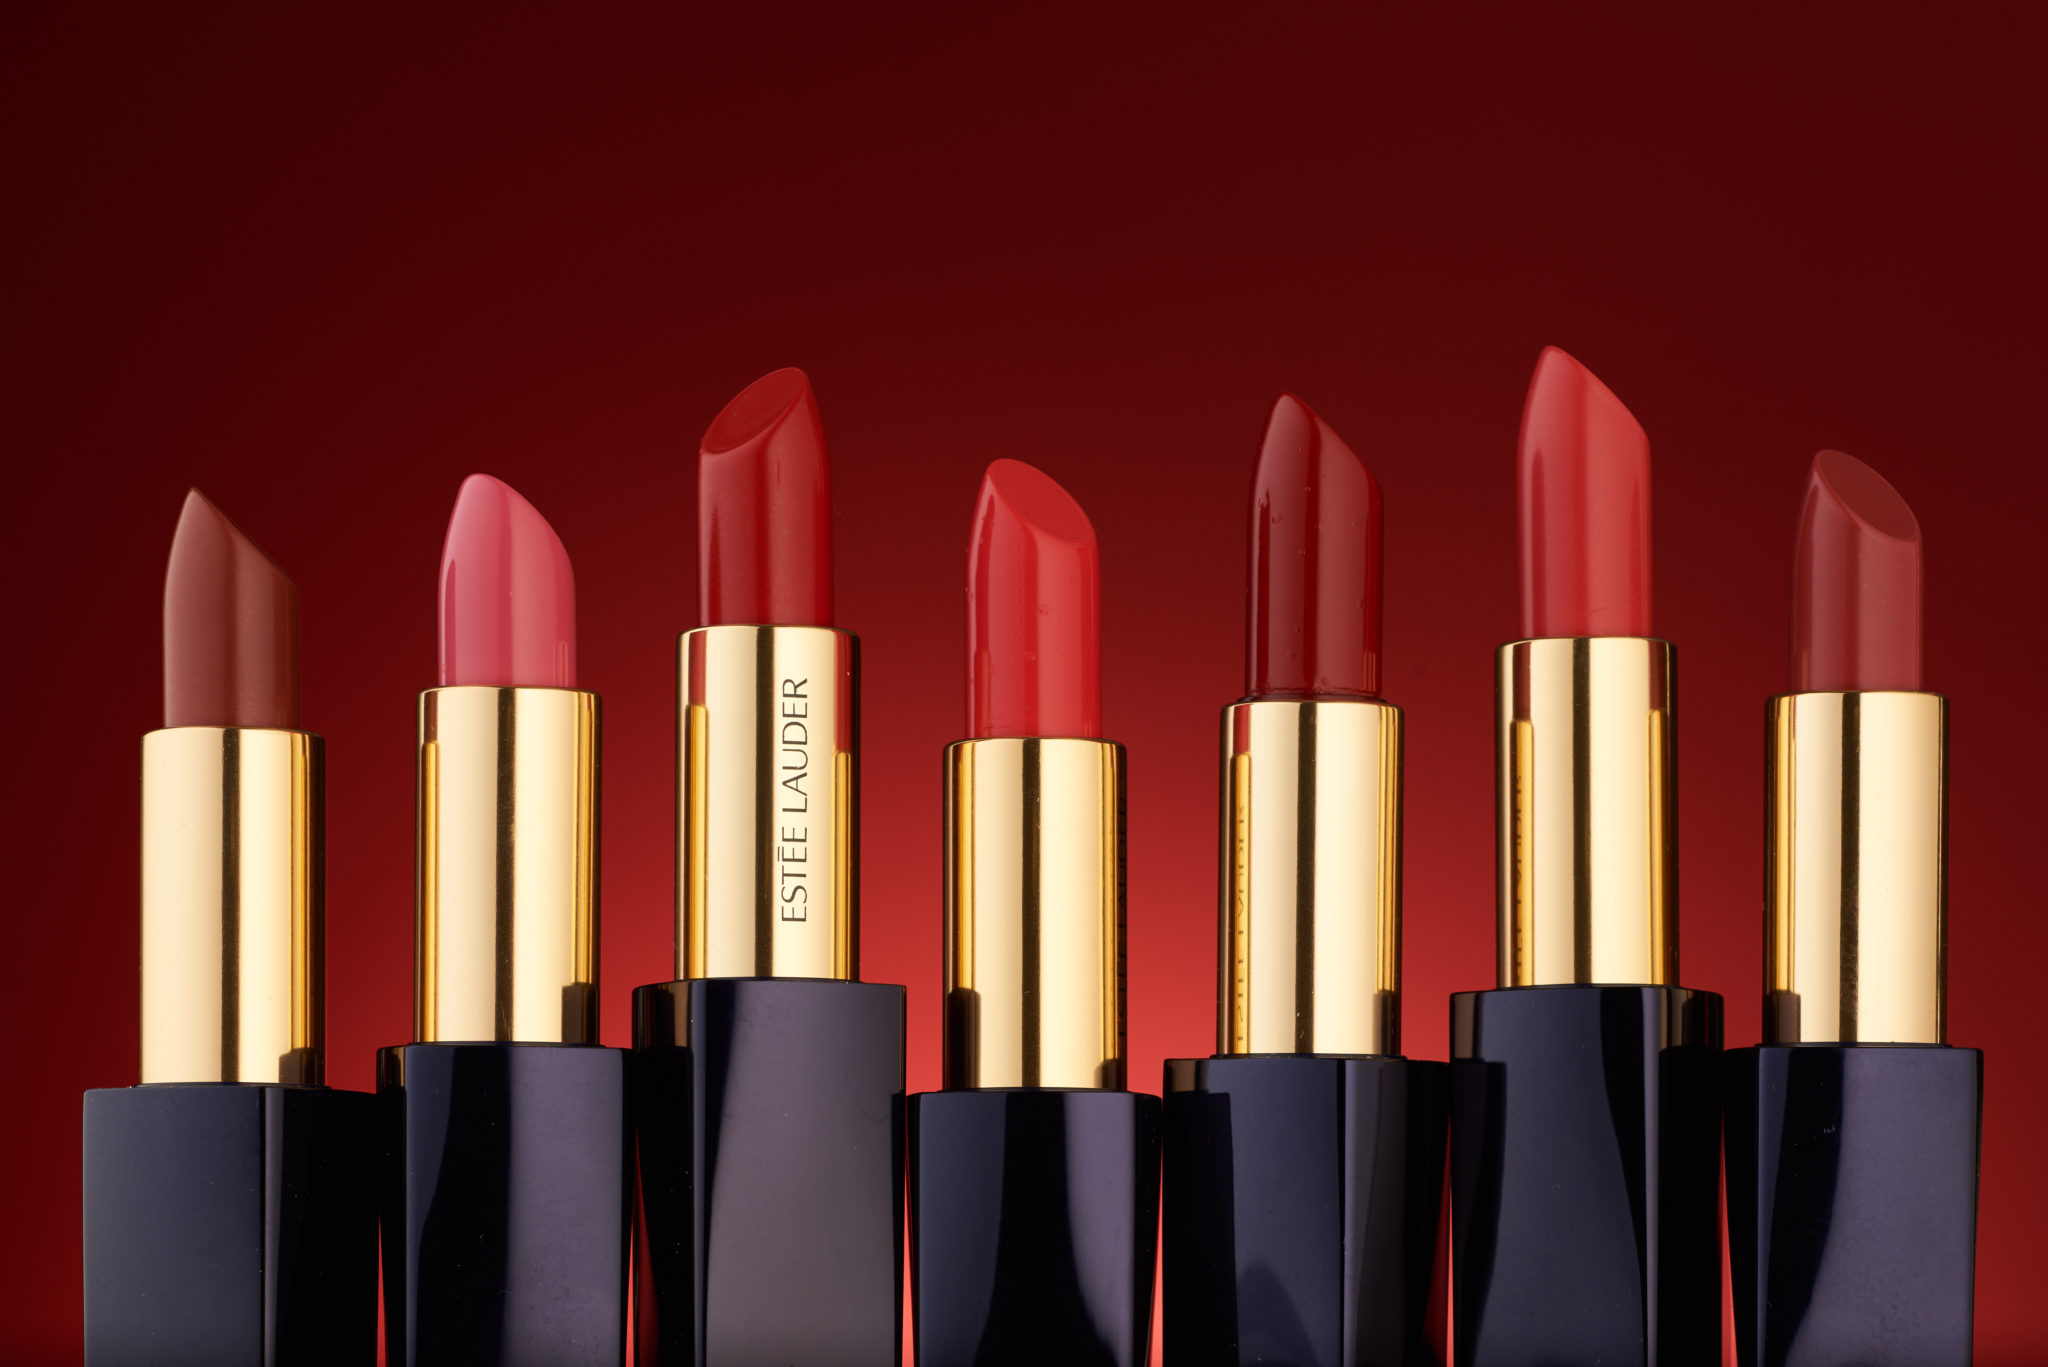 multiple Shades of different Estee Lauder lip stick products lined up